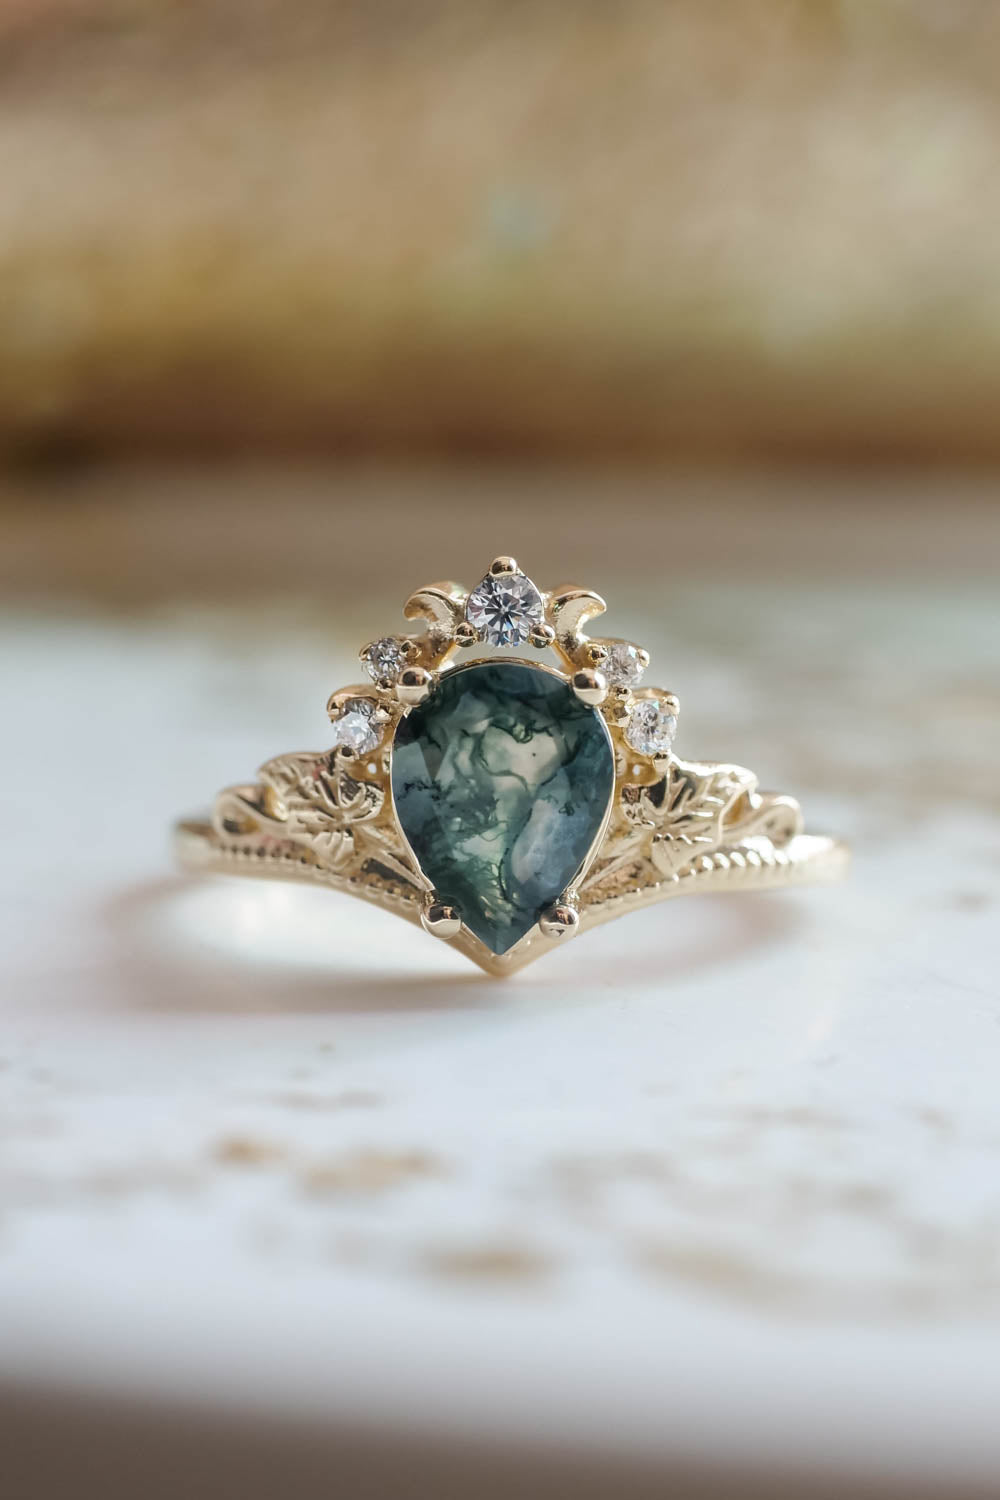 Moss agate proposal ring, non-trivial green stone engagement ring / Ariadne